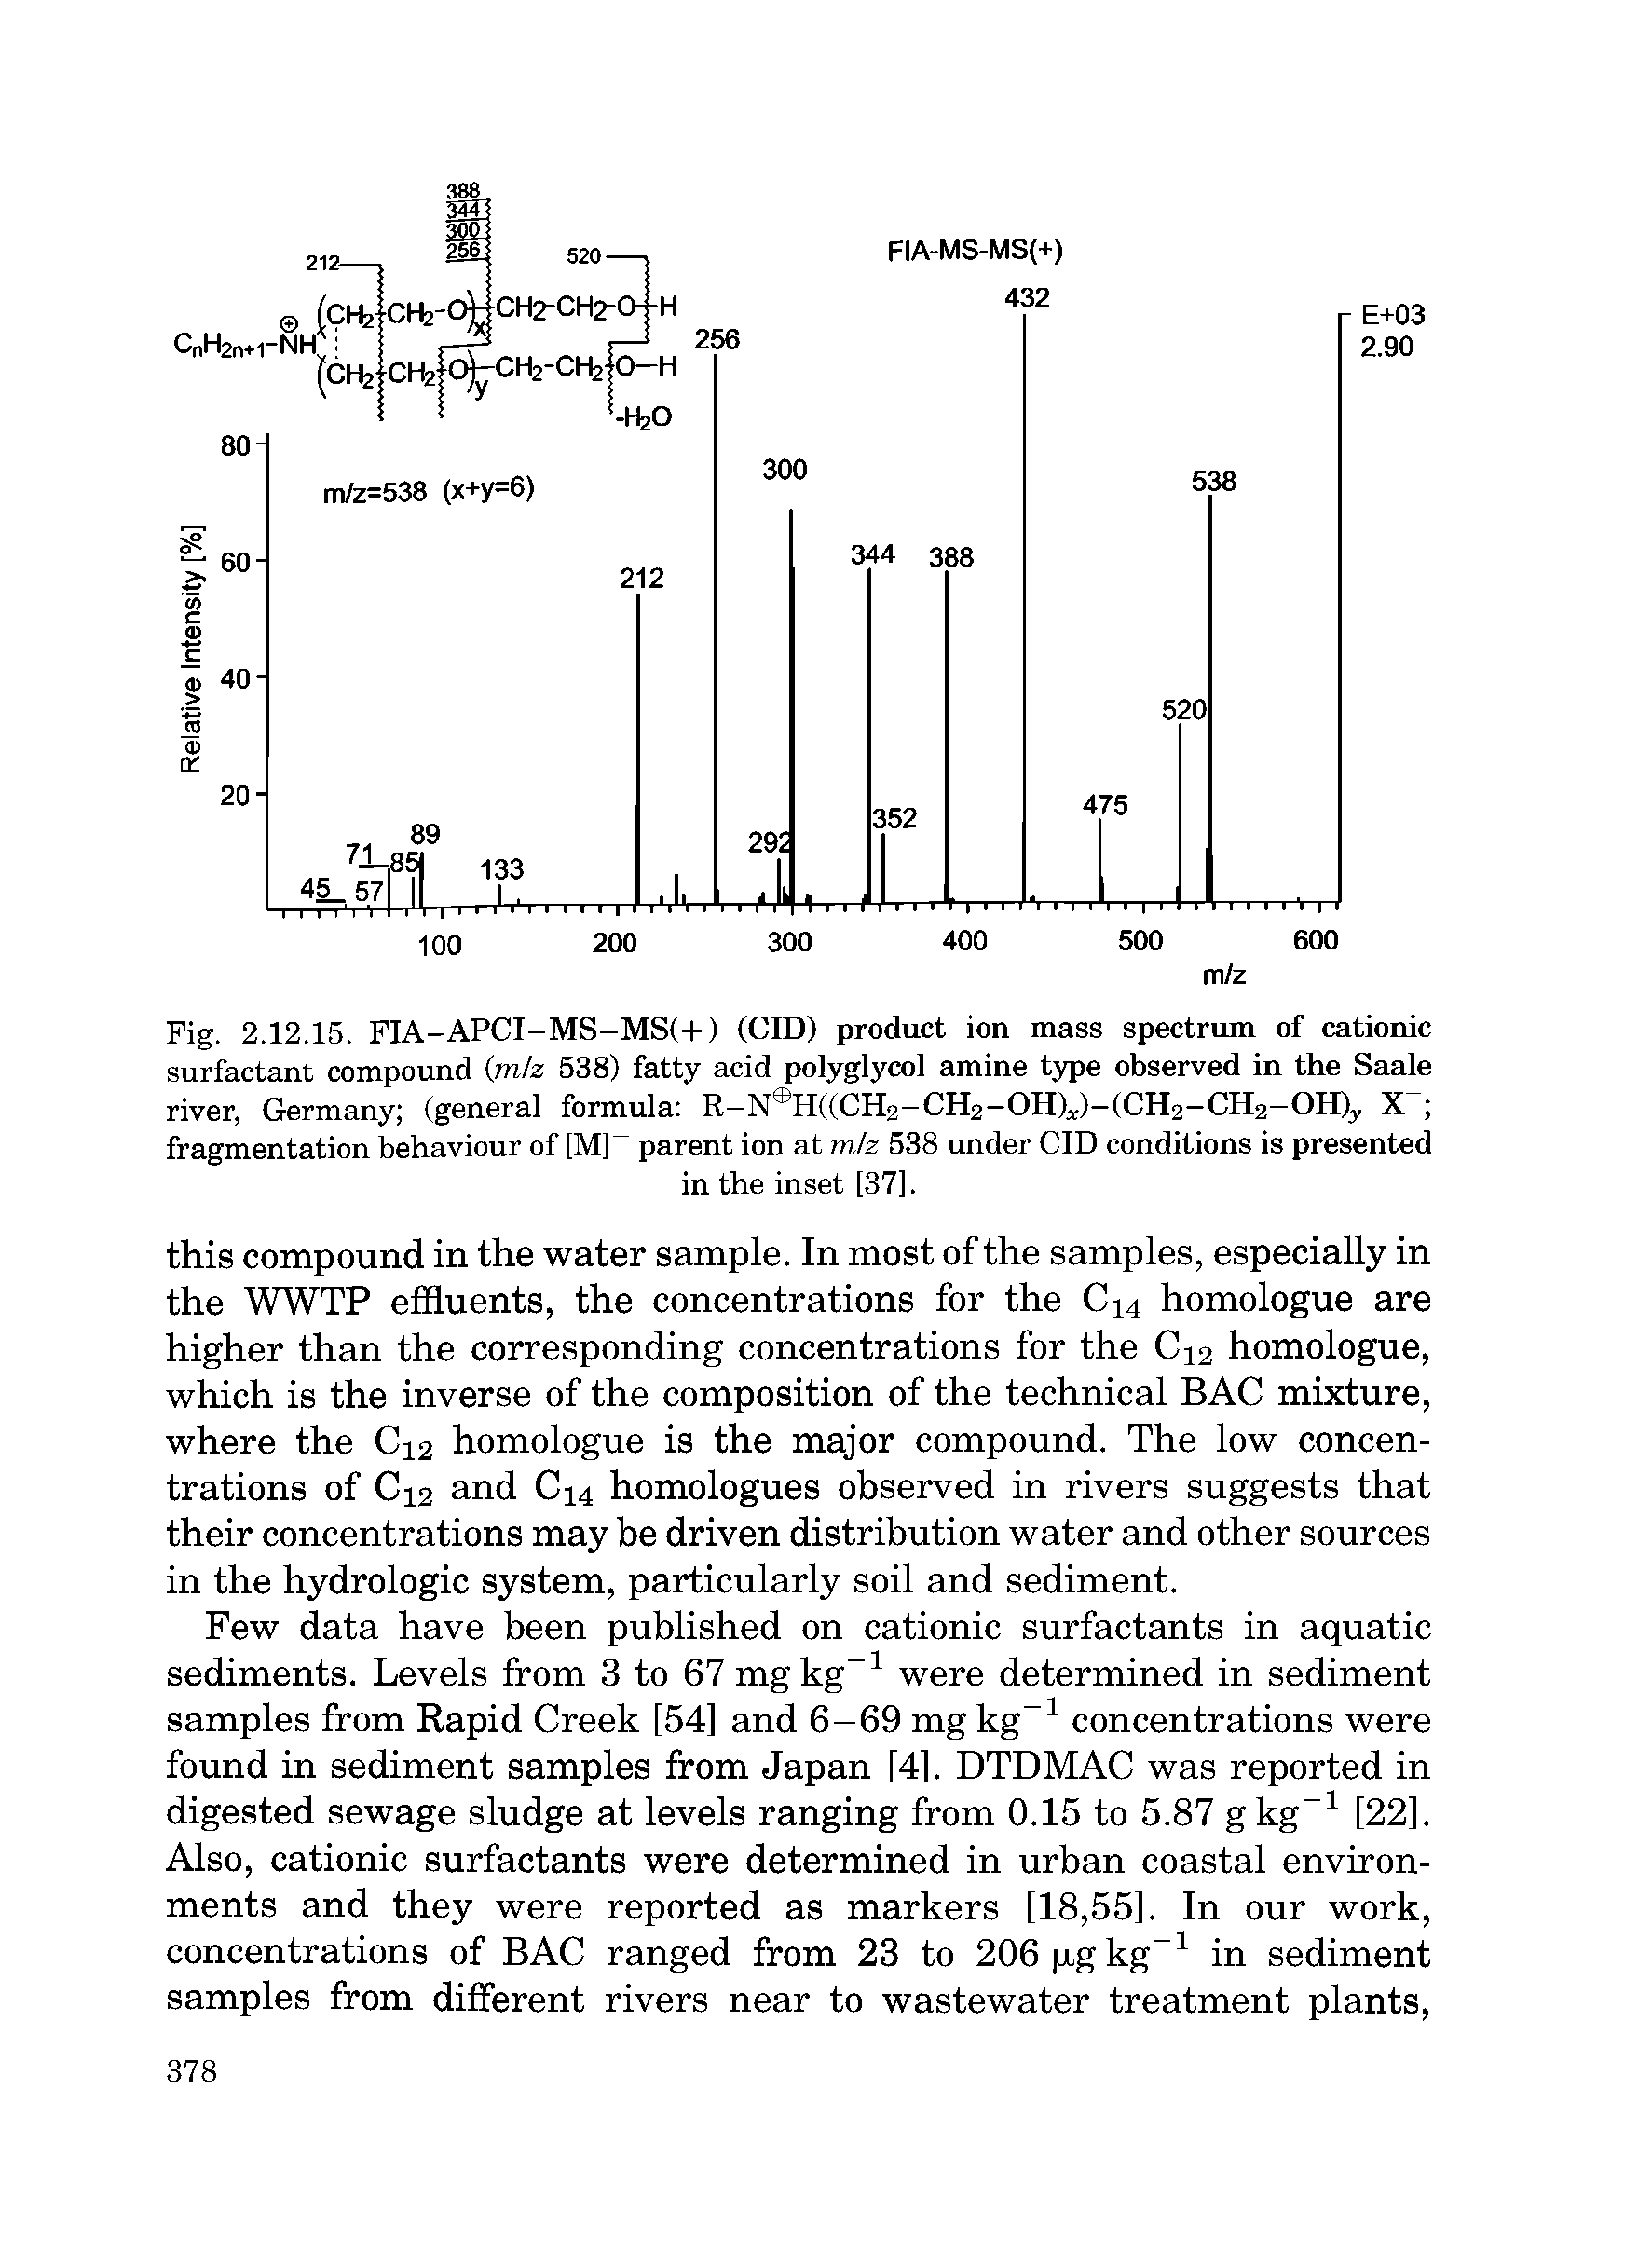 Fig. 2.12.15. FIA-APCI-MS-MS(+) (CID) product ion mass spectrum of cationic surfactant compound (m/z 538) fatty acid polyglycol amine type observed in the Saale river, Germany (general formula R—N H((CH2—CH2—OH)x)—(CH2—CH2—OH)y X fragmentation behaviour of [M]+ parent ion at m/z 538 under CID conditions is presented...